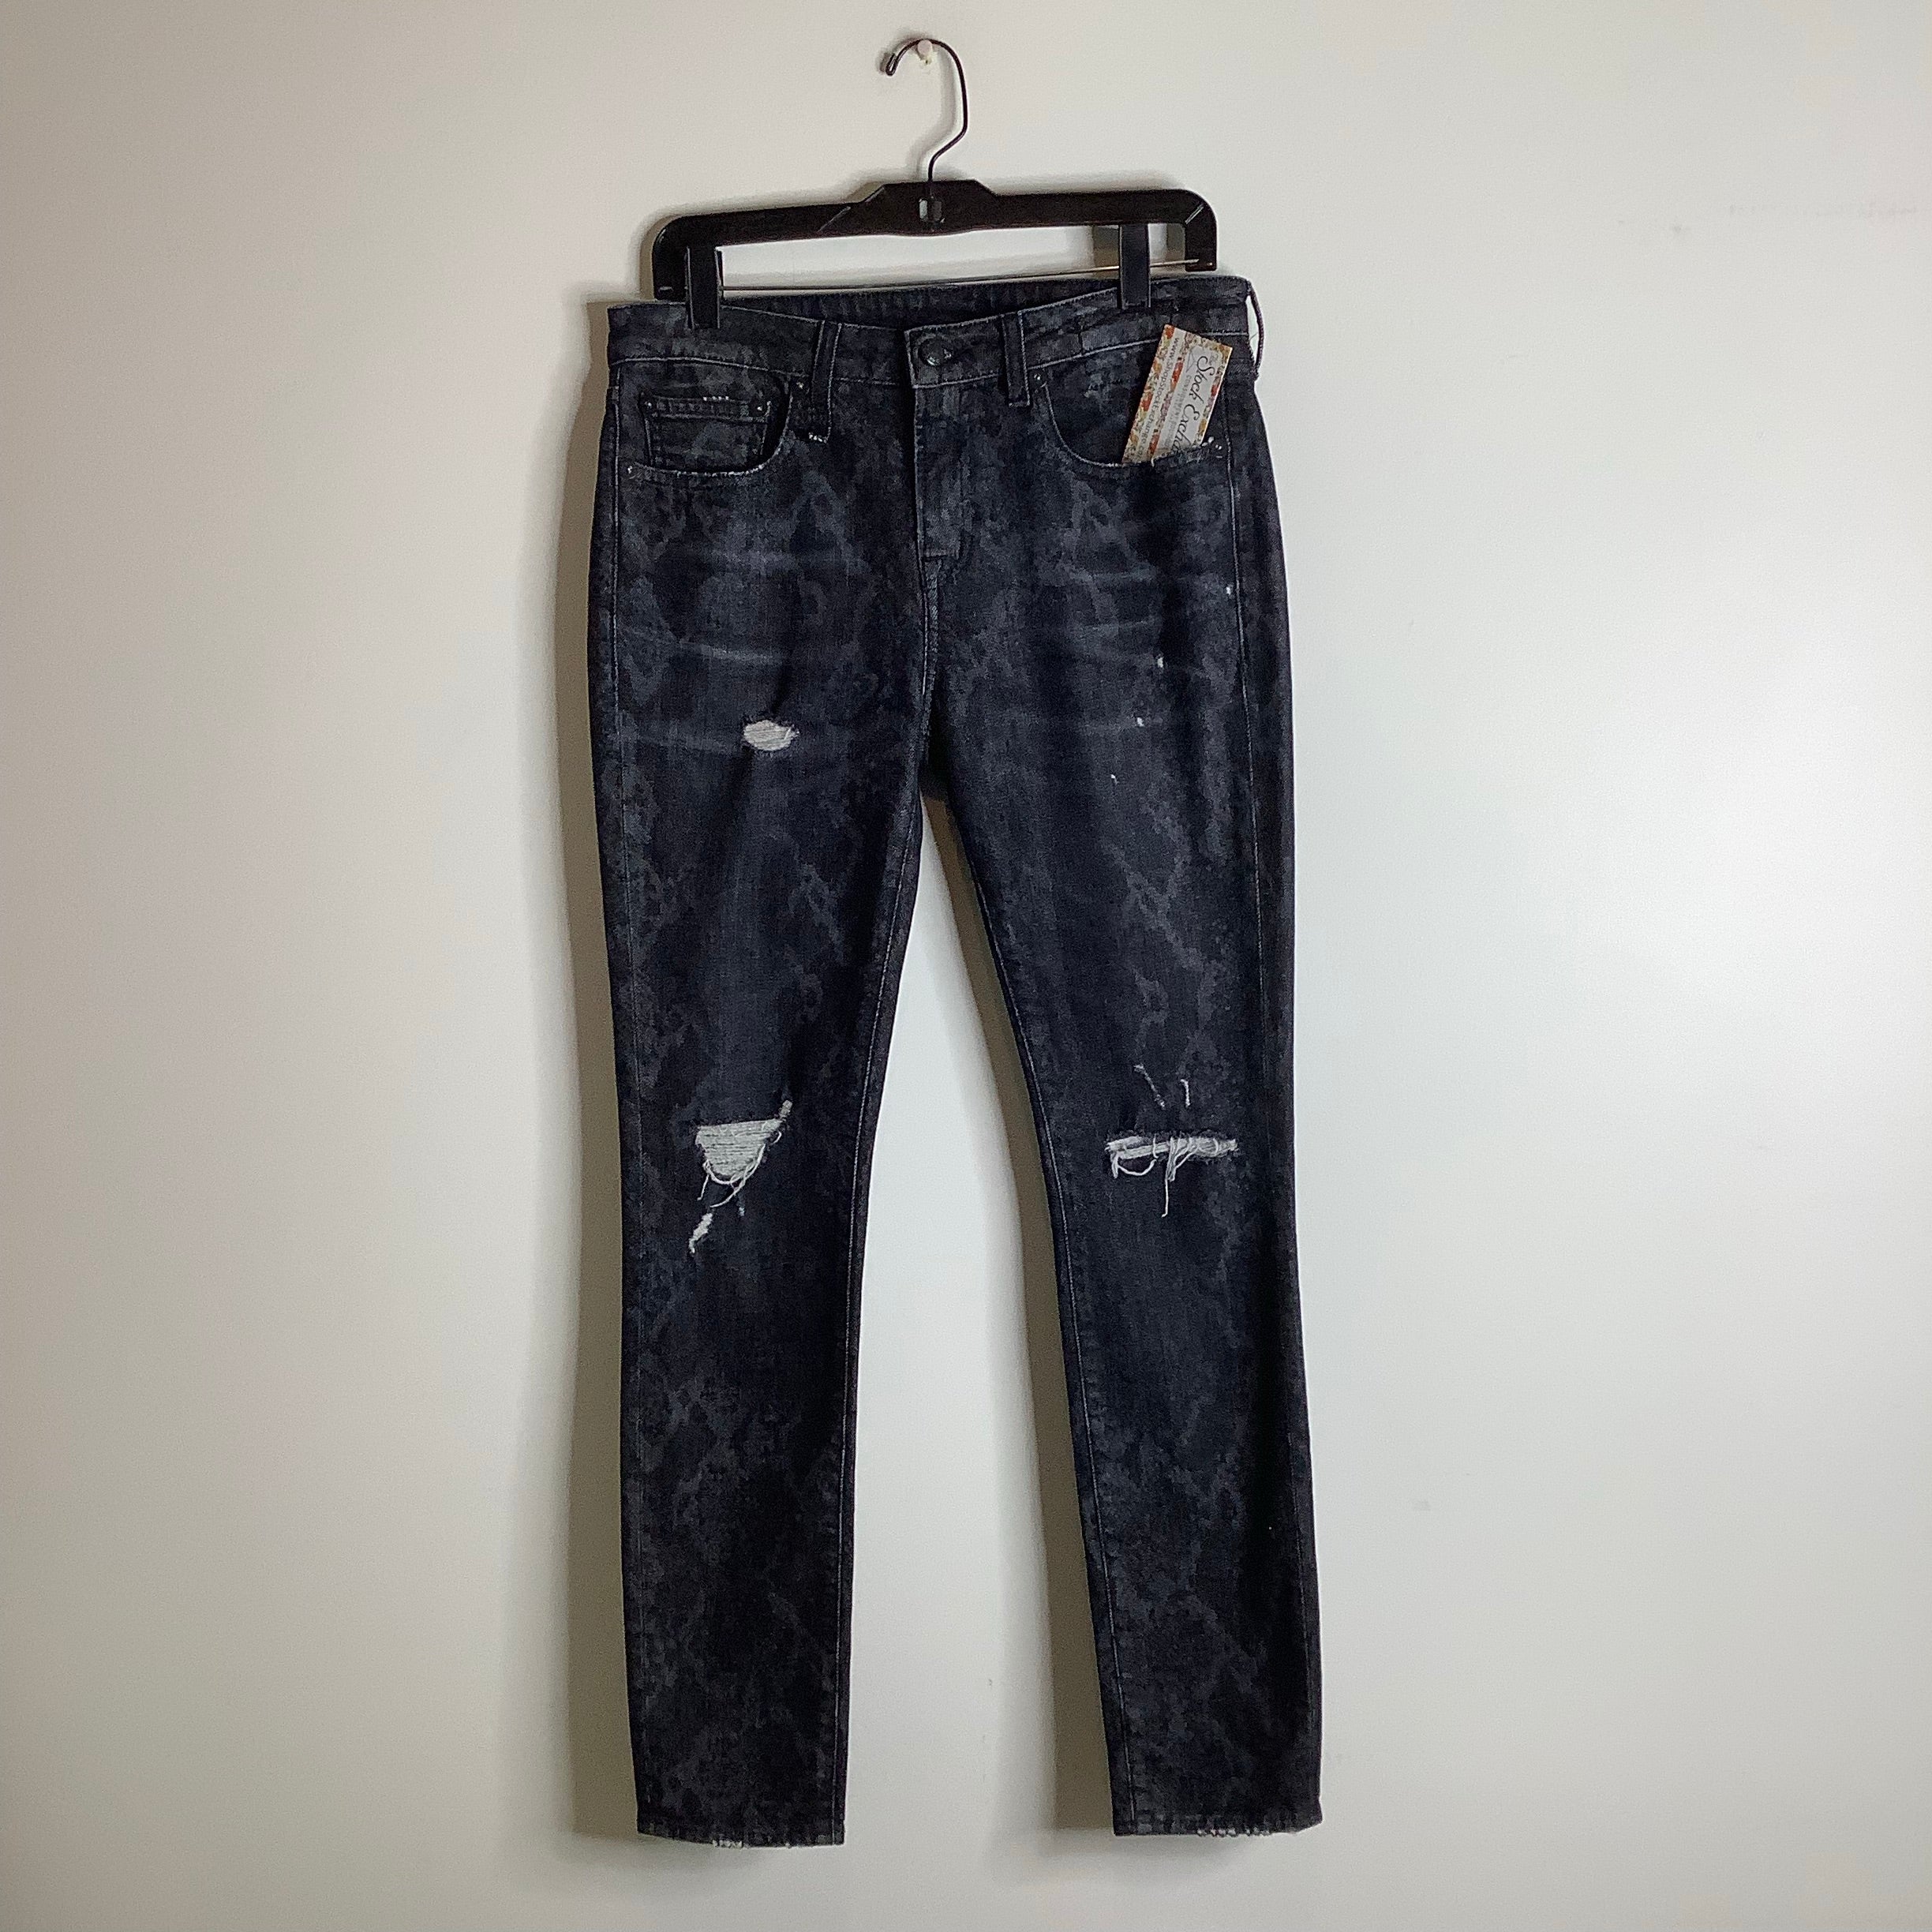 R13 Gray Jeans Size 29